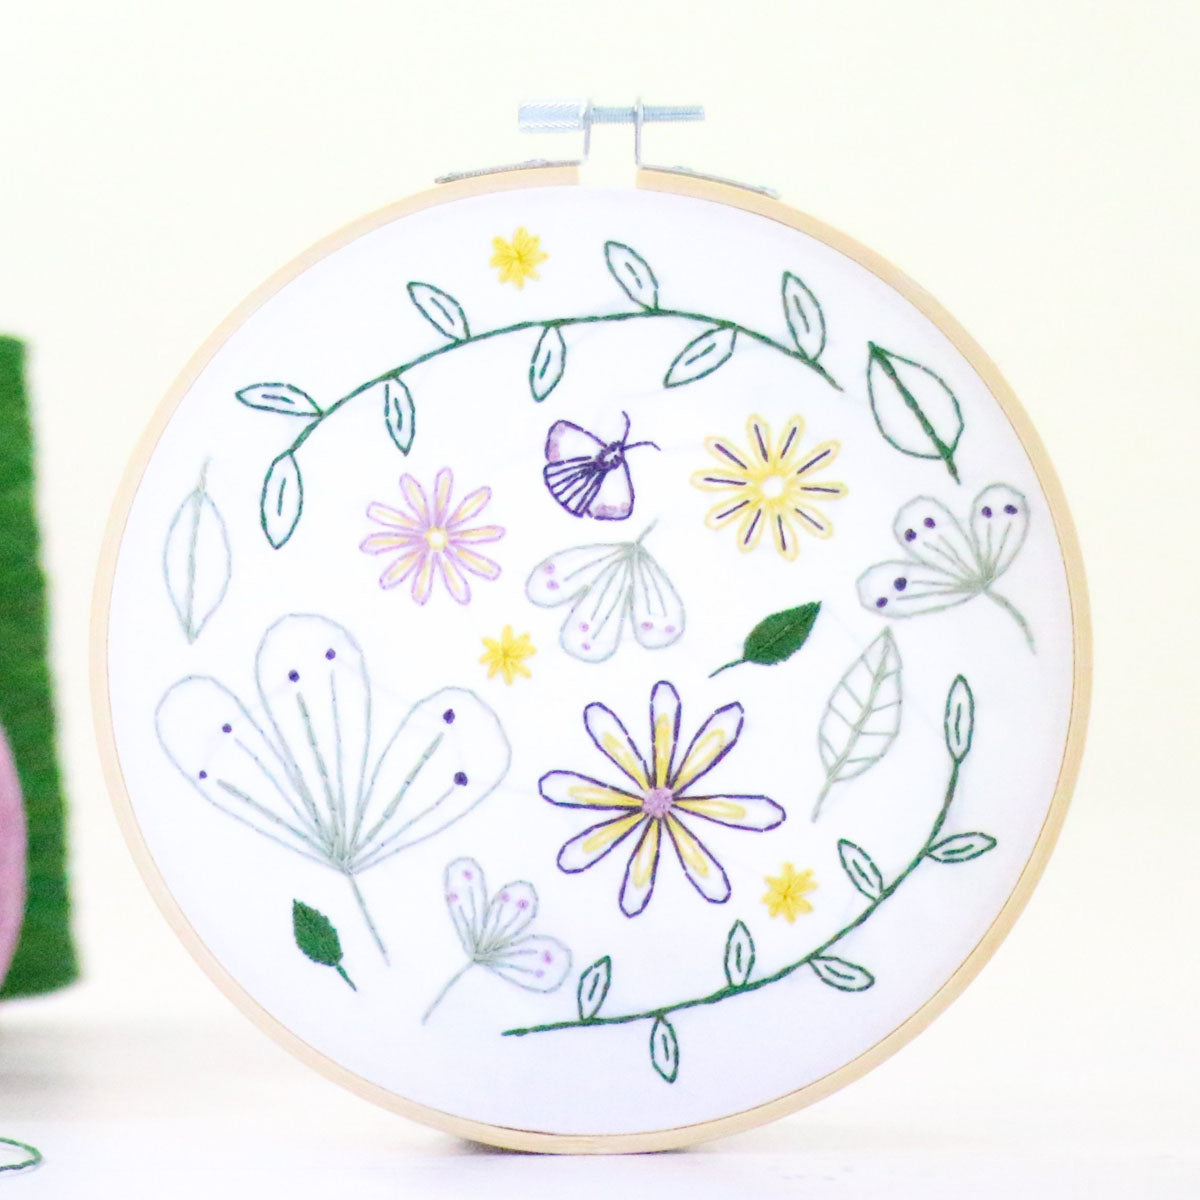 Wildflower Meadow Hand Embroidery Kit